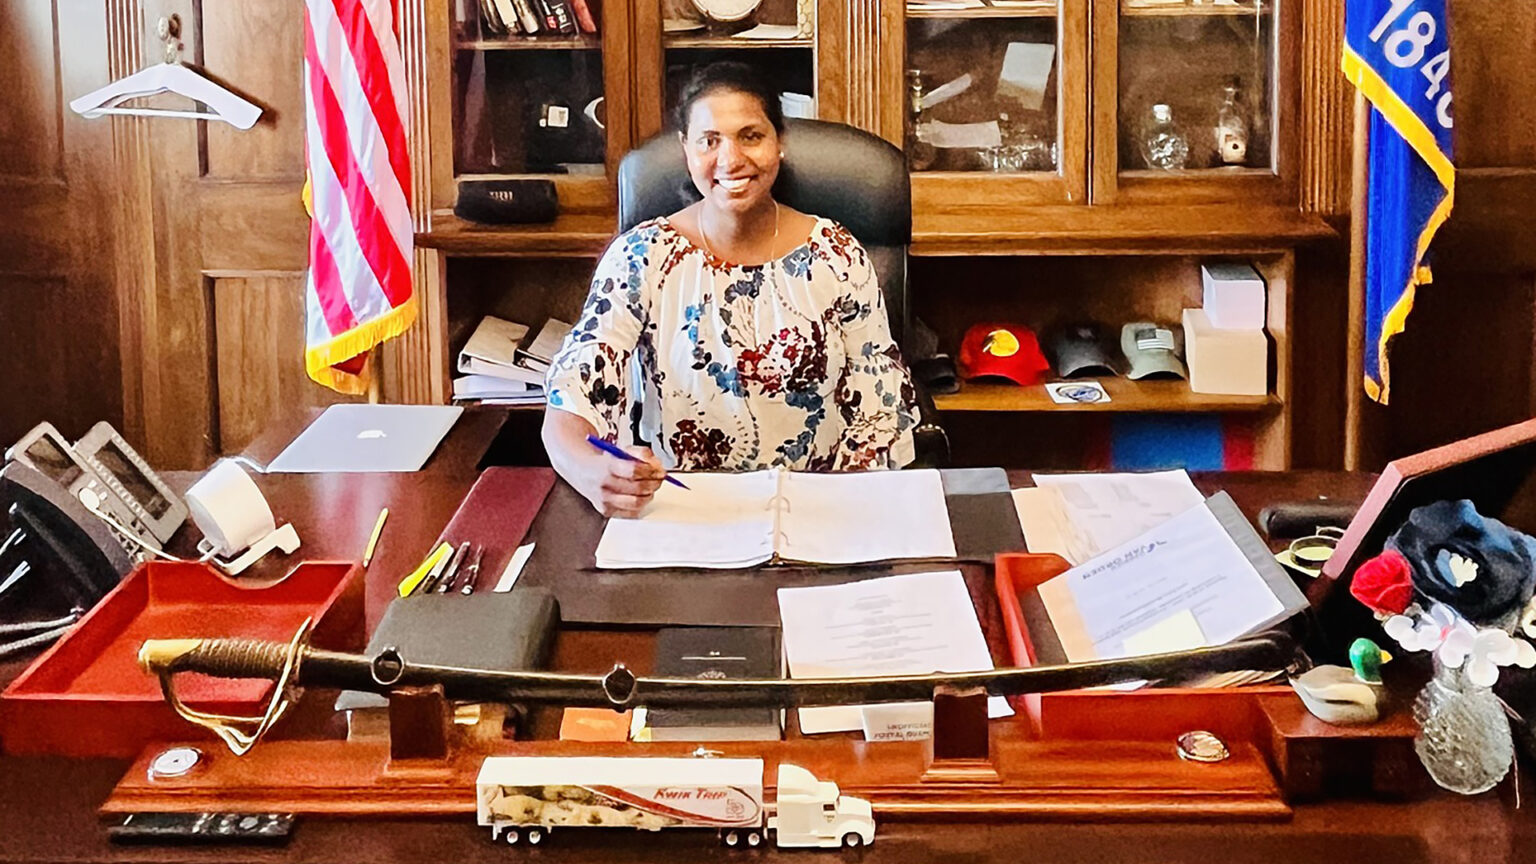 Rejani Raveendran poses for a photo while sitting in a high-backed leather chair at a wooden desk with multiple items on its surface, including a phone, speakers, various papers and books, photo frame, ceremonial sword and model semi truck, in a room with glass-doored cabinets and the U.S. and Wisconsin flags in the background.